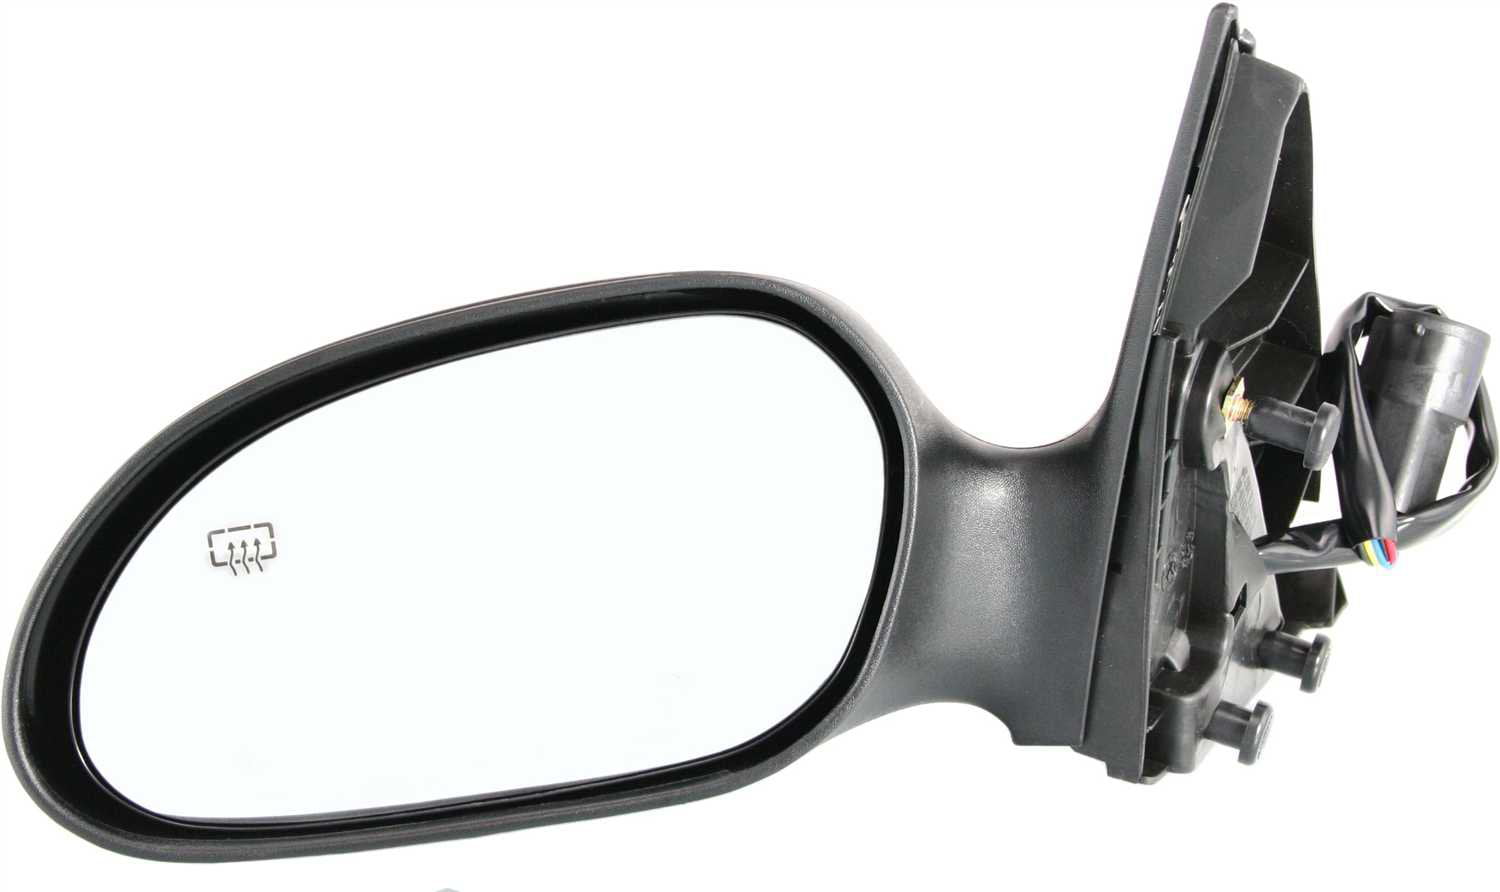 Mirror Compatible With 2000-2007 Ford Taurus 2000-2005 Mercury